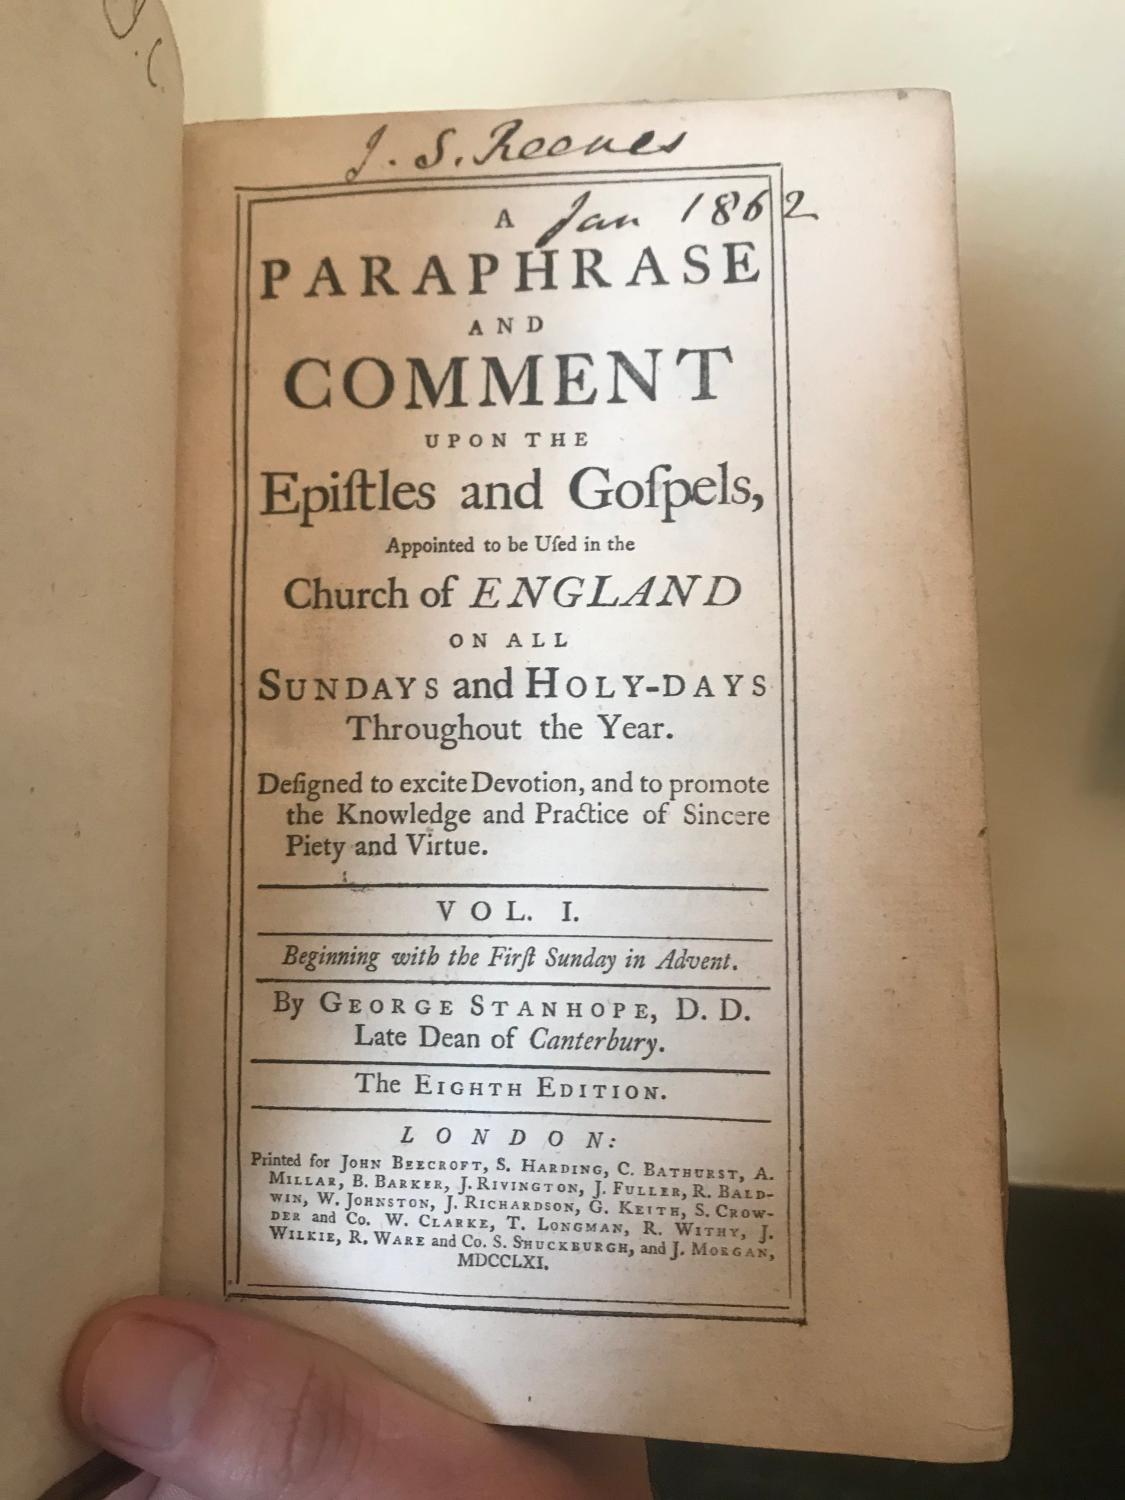 A Paraphrase and Comment upon the Epistles and Gospels Appointed to be used in the Church of England - Vol 1 - Stanhope, George